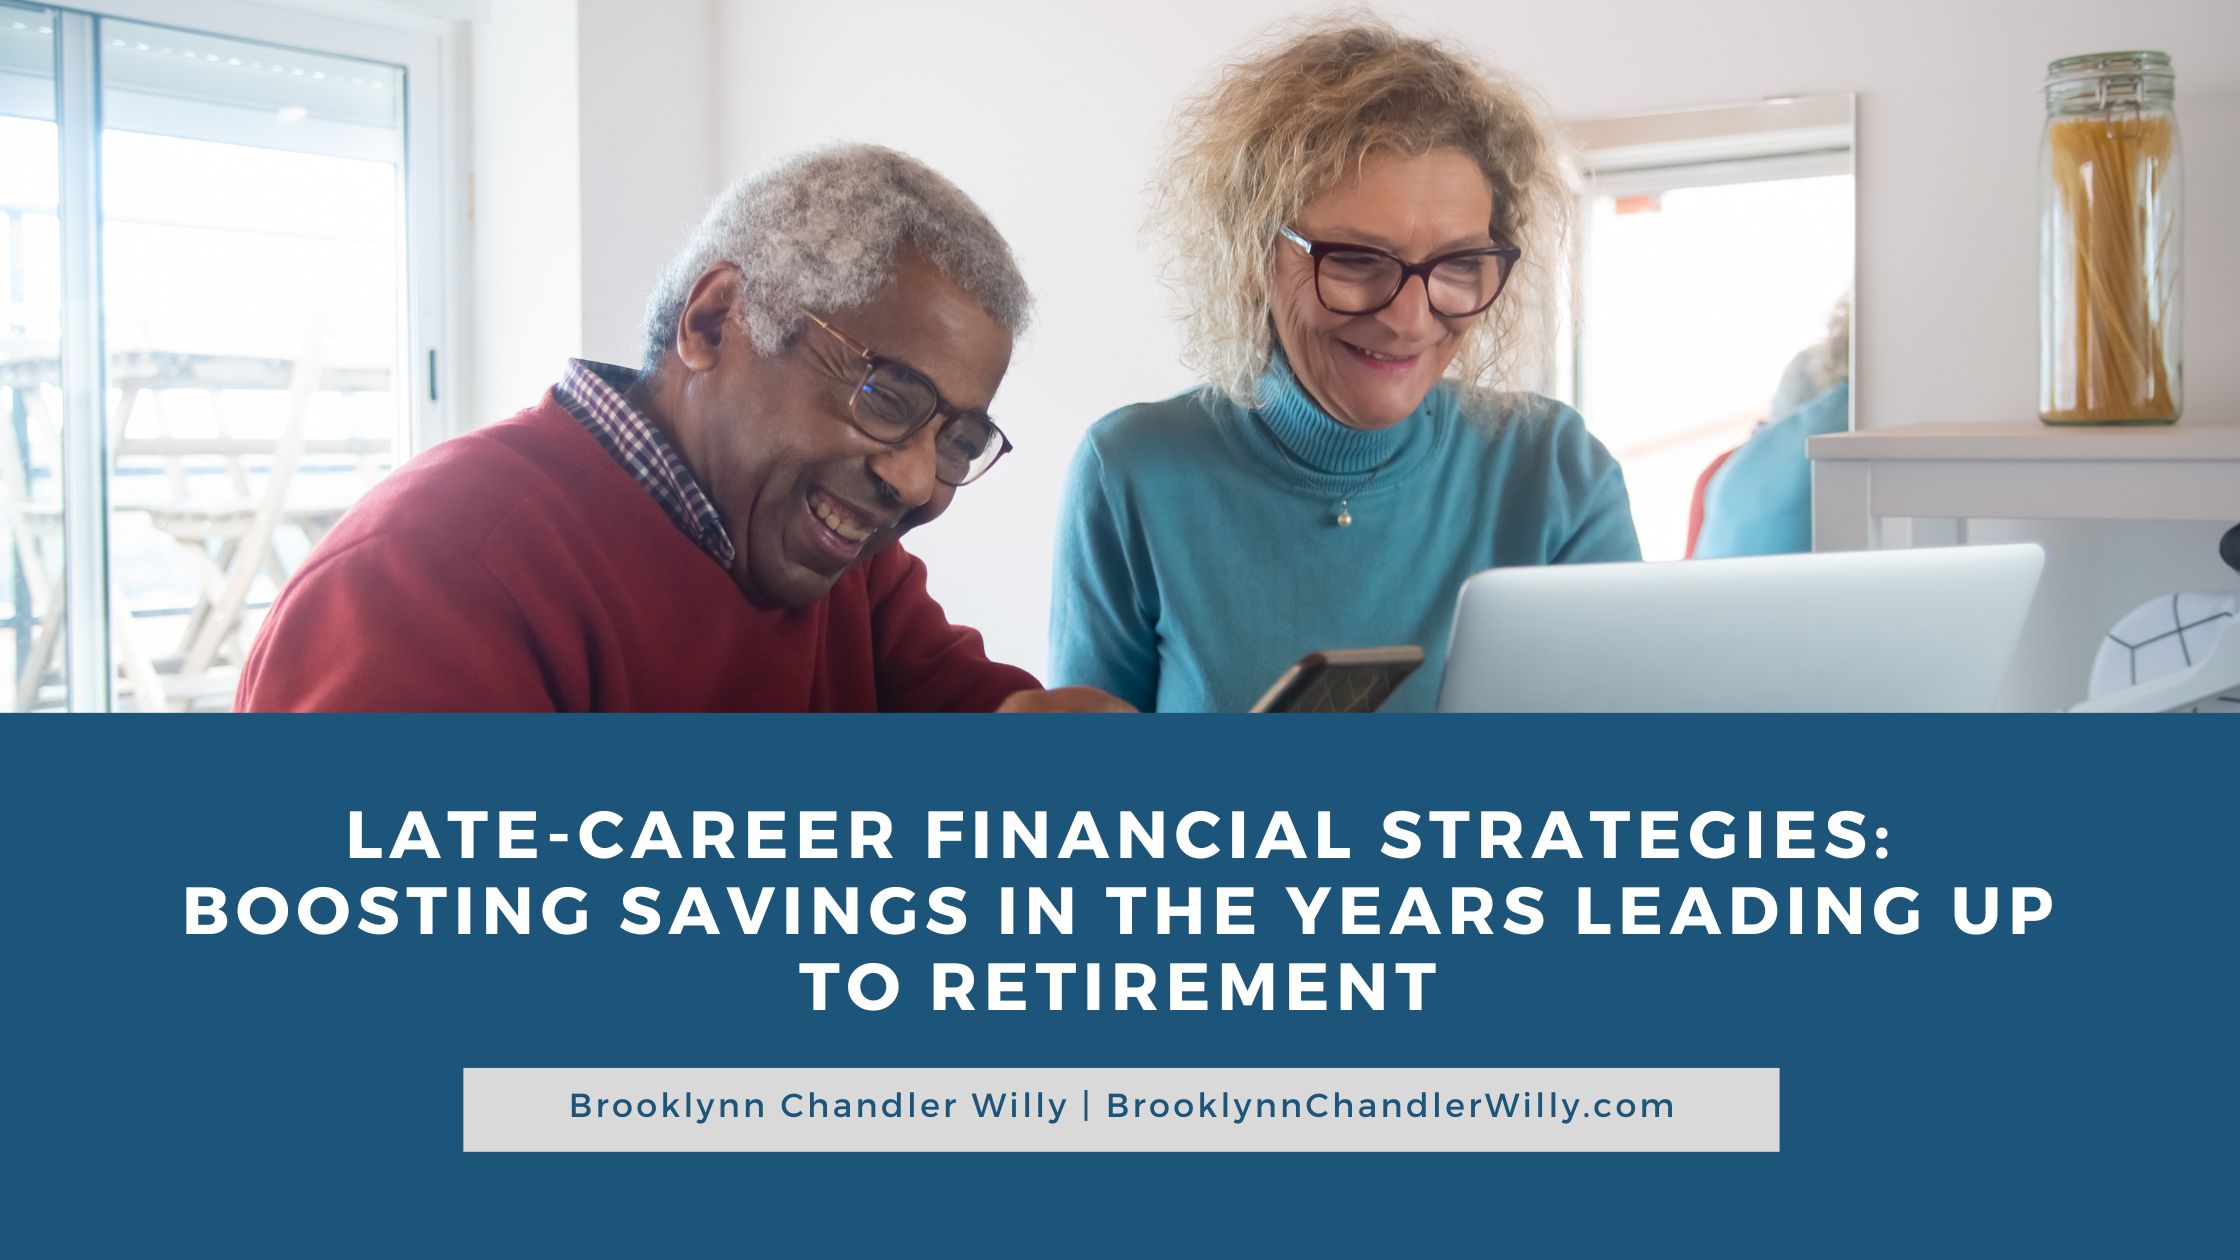 LATE-CAREER FINANCIAL STRATEGIES:
BOOSTING SAVINGS IN THE YEARS LEADING UP
TO RETIREMENT

Brooklynn Chandler Willy | BrooklynnChandlerWilly.com